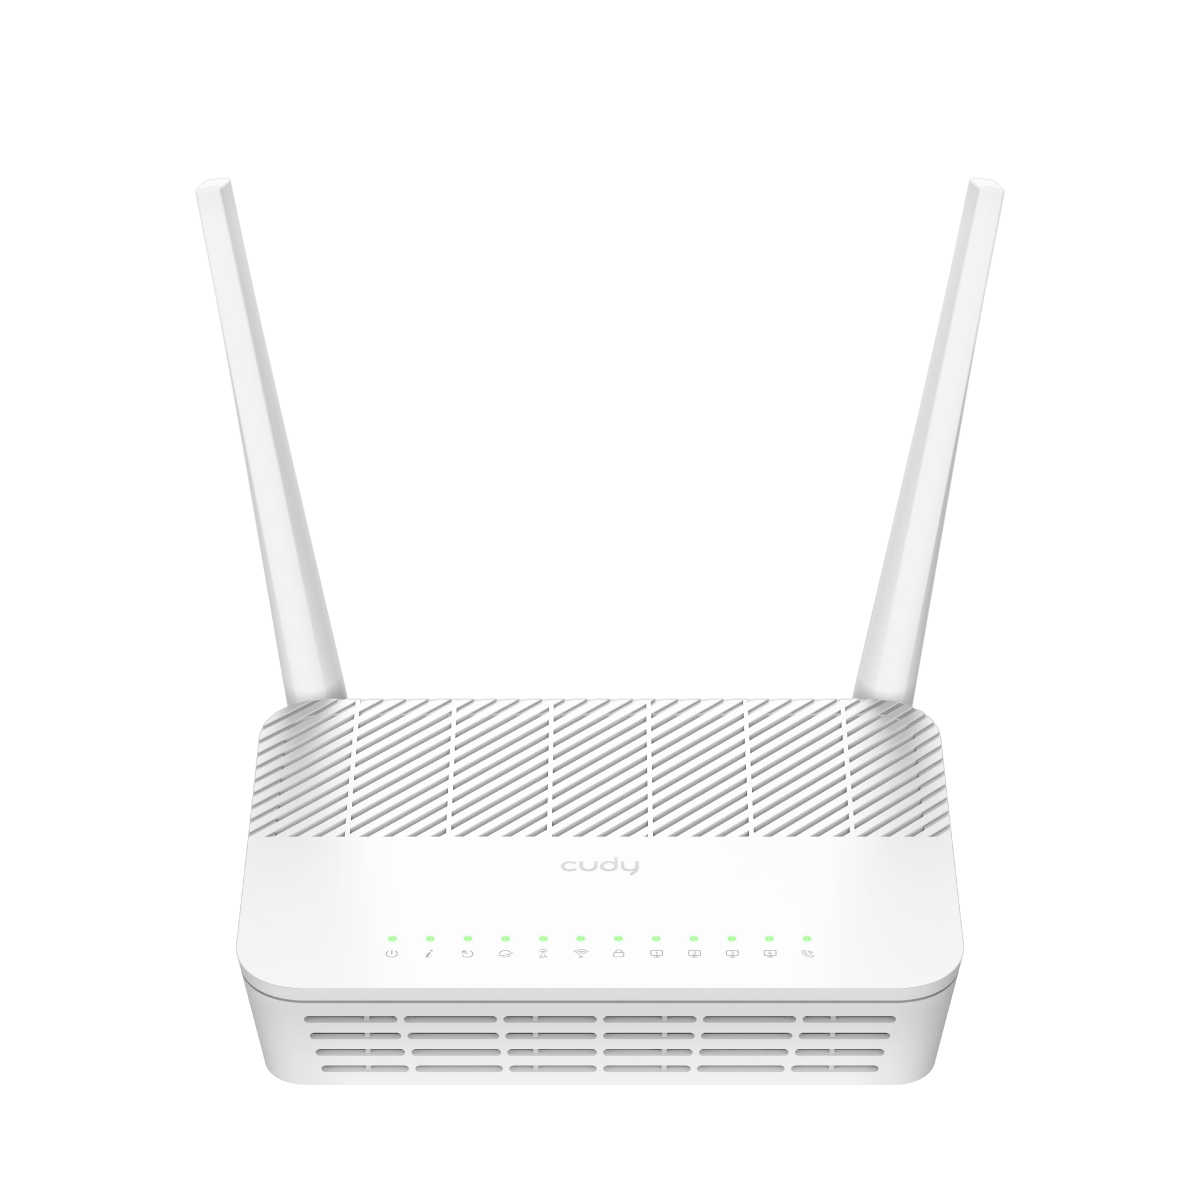 AC1200 xPON VoIP Wi-Fi Router, GP1200V 1.0